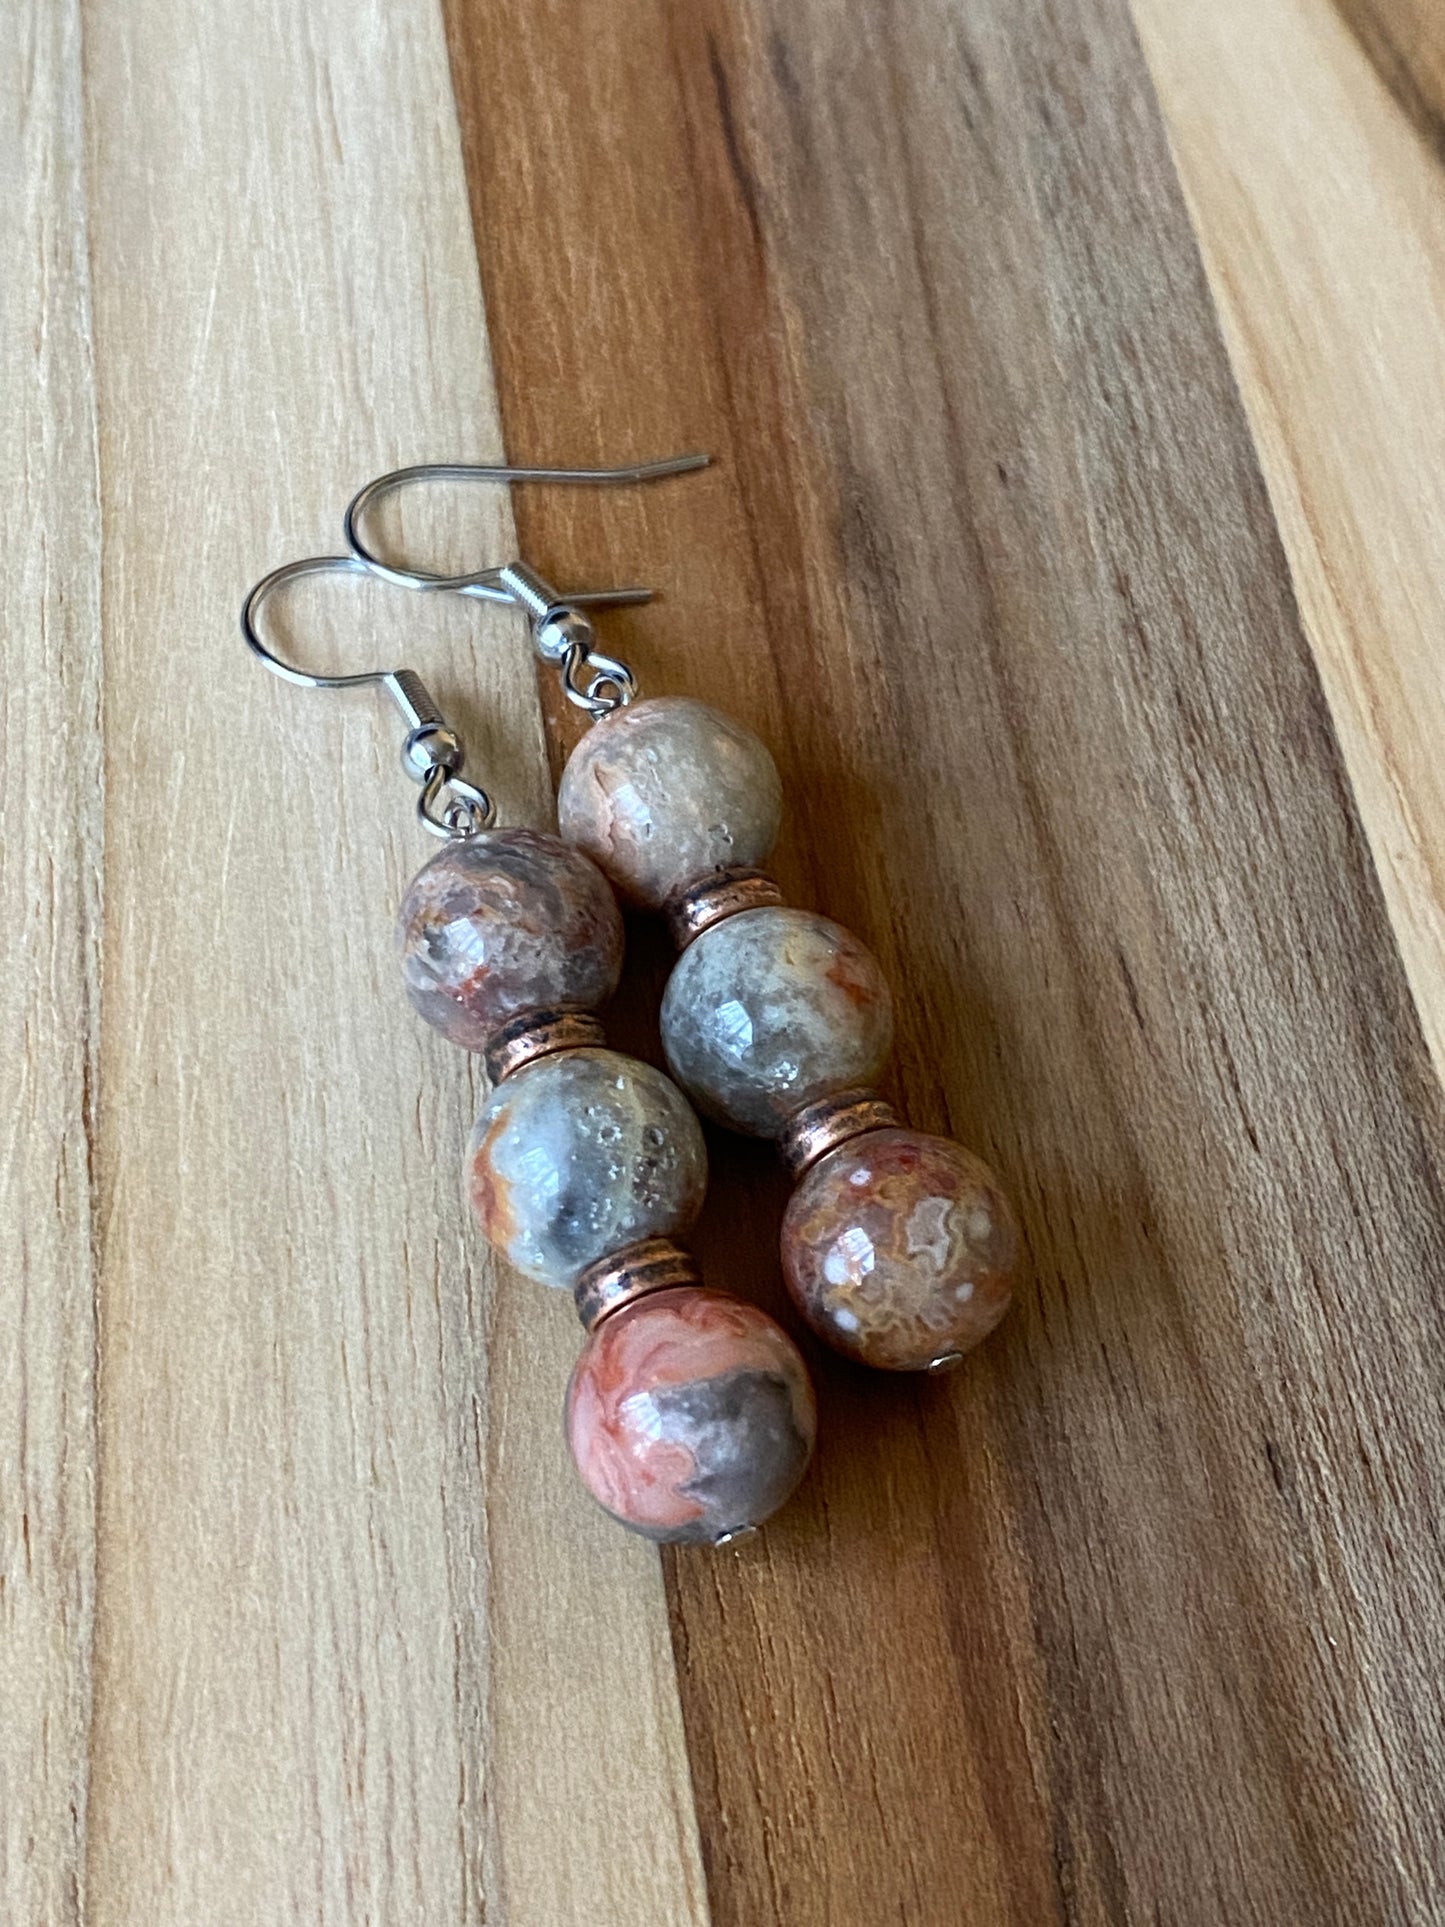 Red Crazy Lace Agate Dangle Earrings with Copper Accents